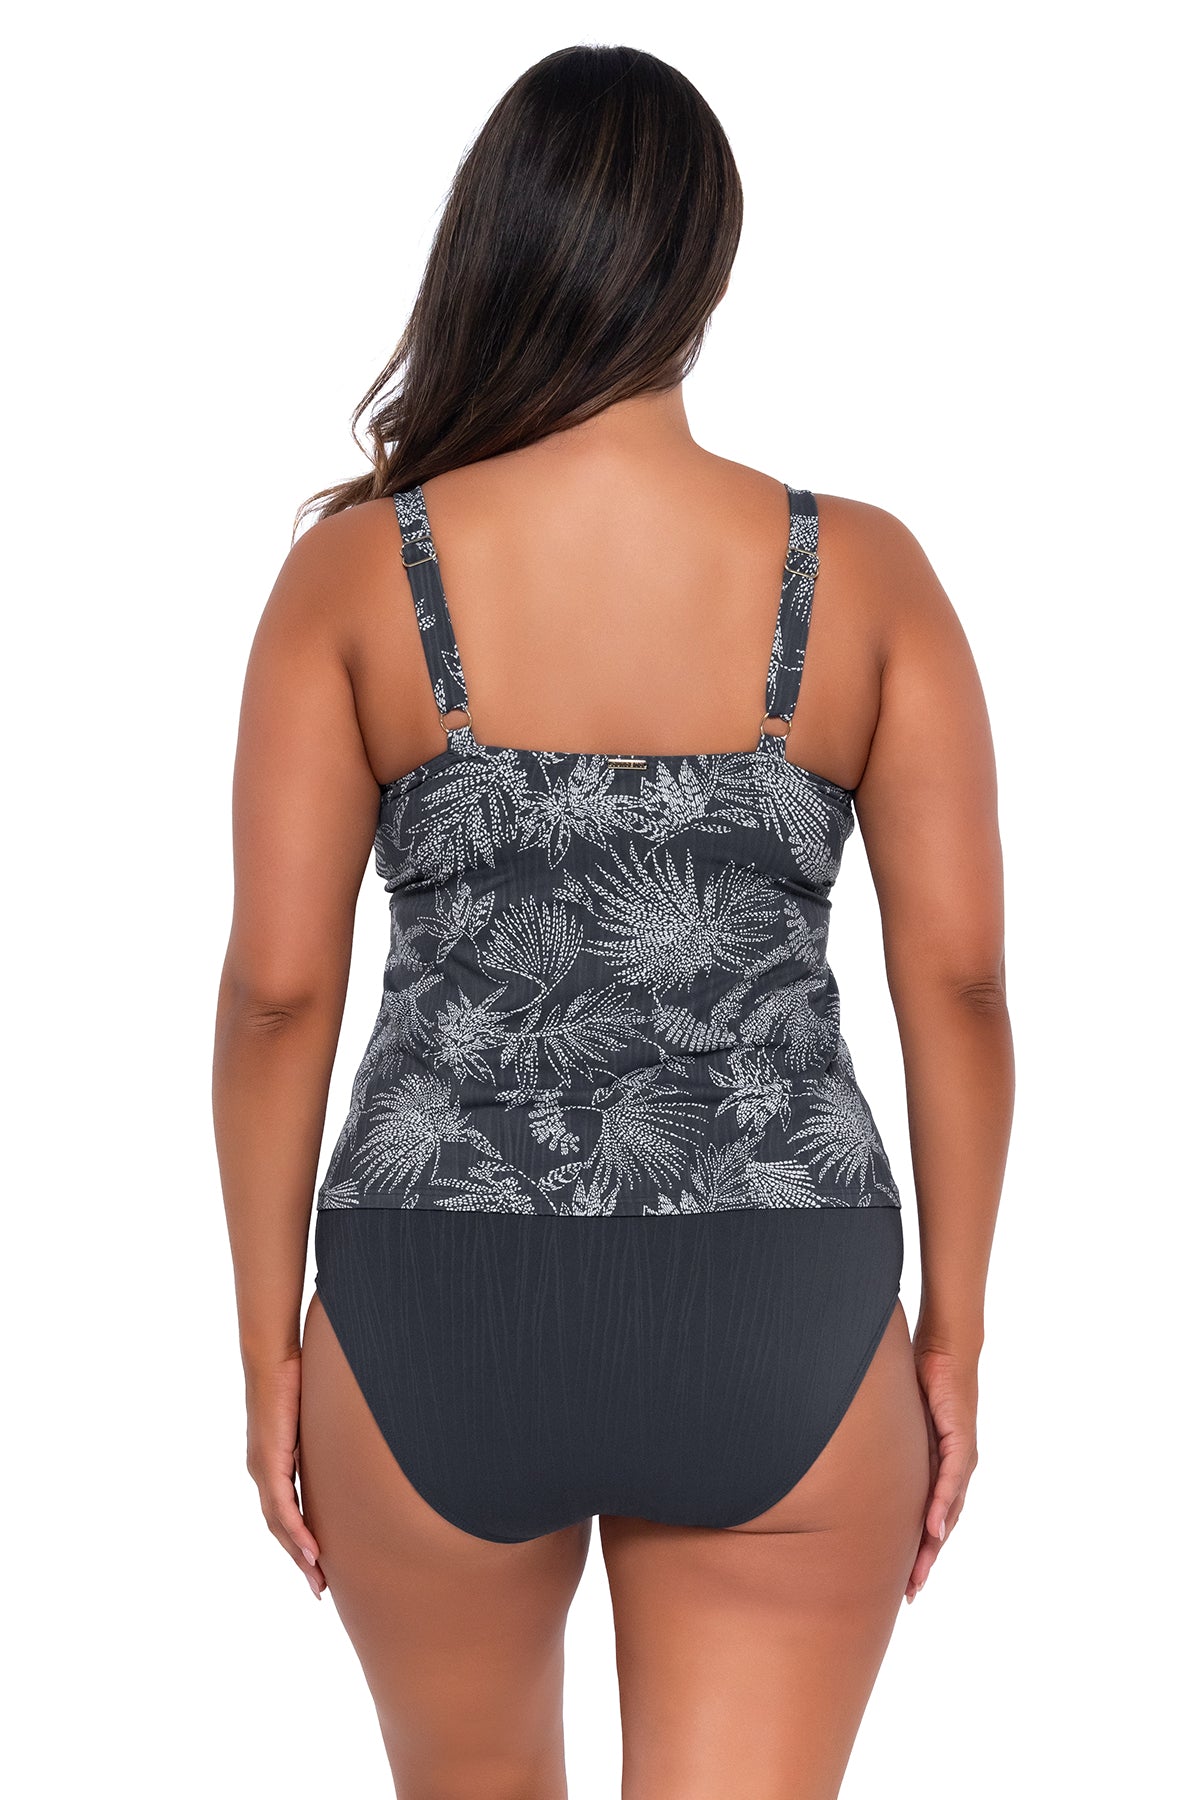 Sunsets Fanfare Seagrass Texture Forever Tankini Top